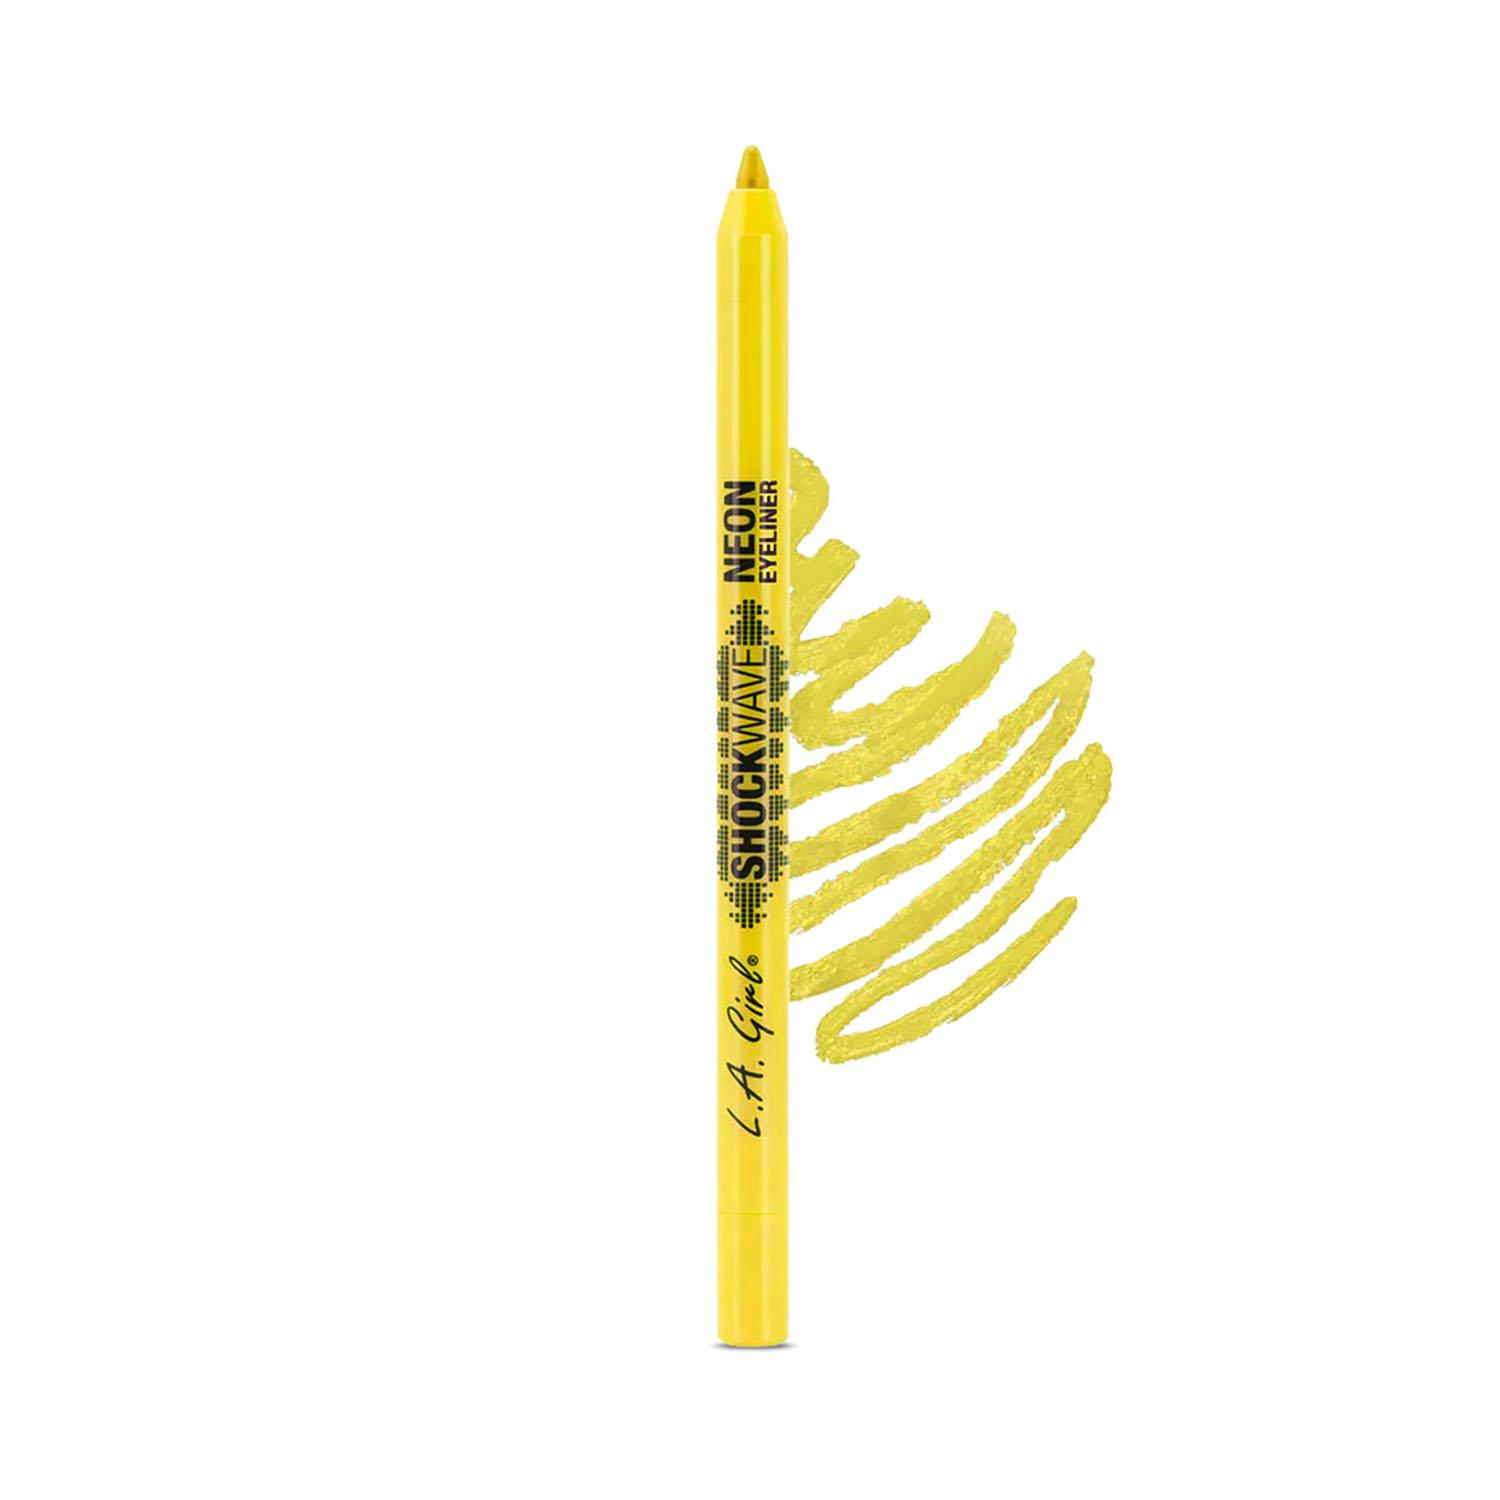 L.A. Girl | L.A. Girl Shockwave Neon Eye Liner - Scream in (Yellow) (1.2g)